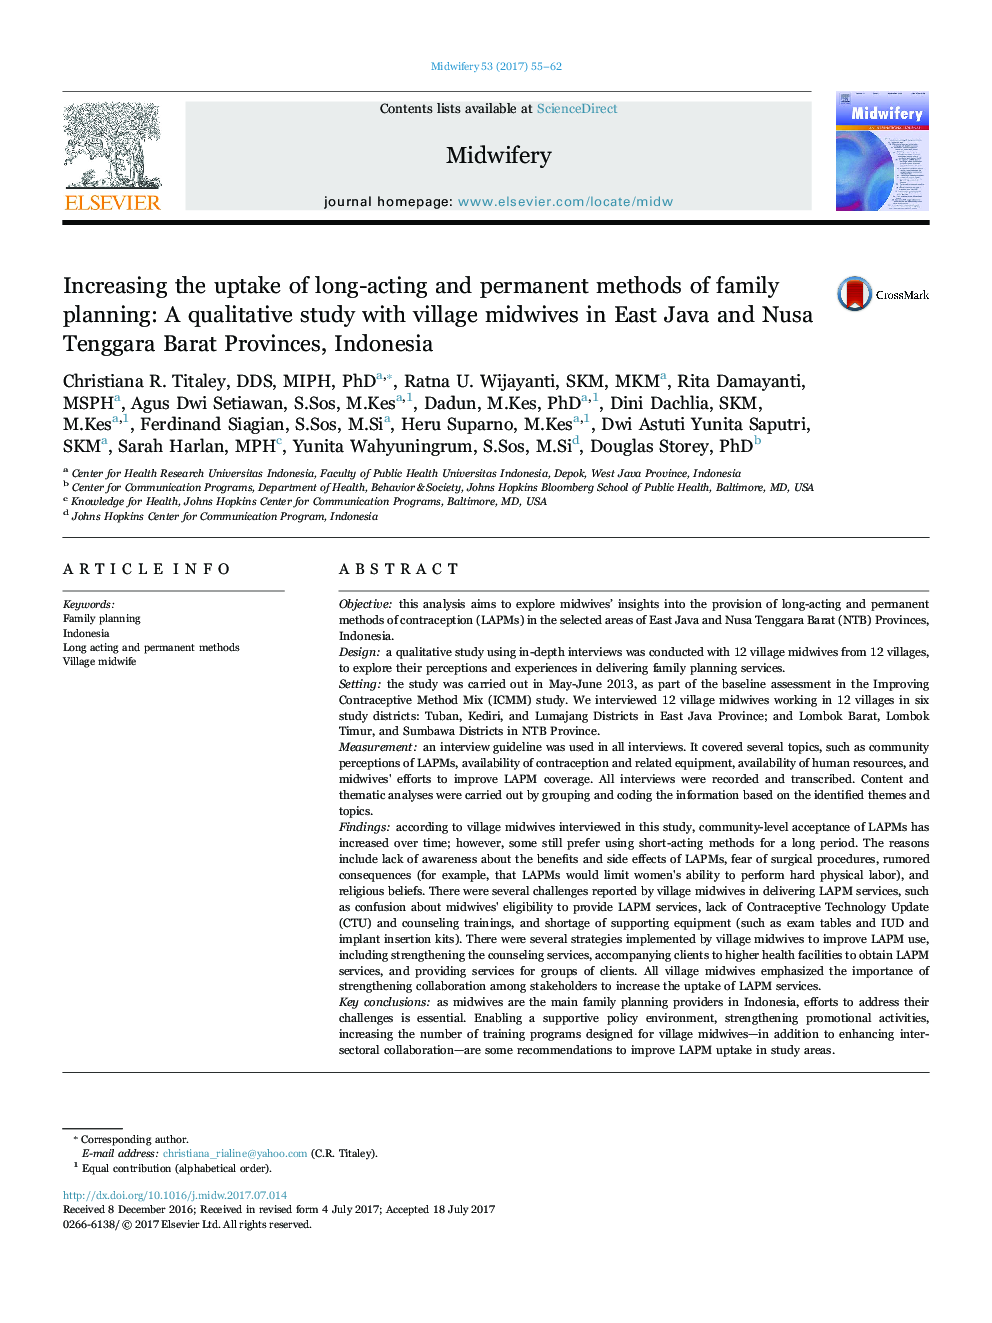 Increasing the uptake of long-acting and permanent methods of family planning: A qualitative study with village midwives in East Java and Nusa Tenggara Barat Provinces, Indonesia